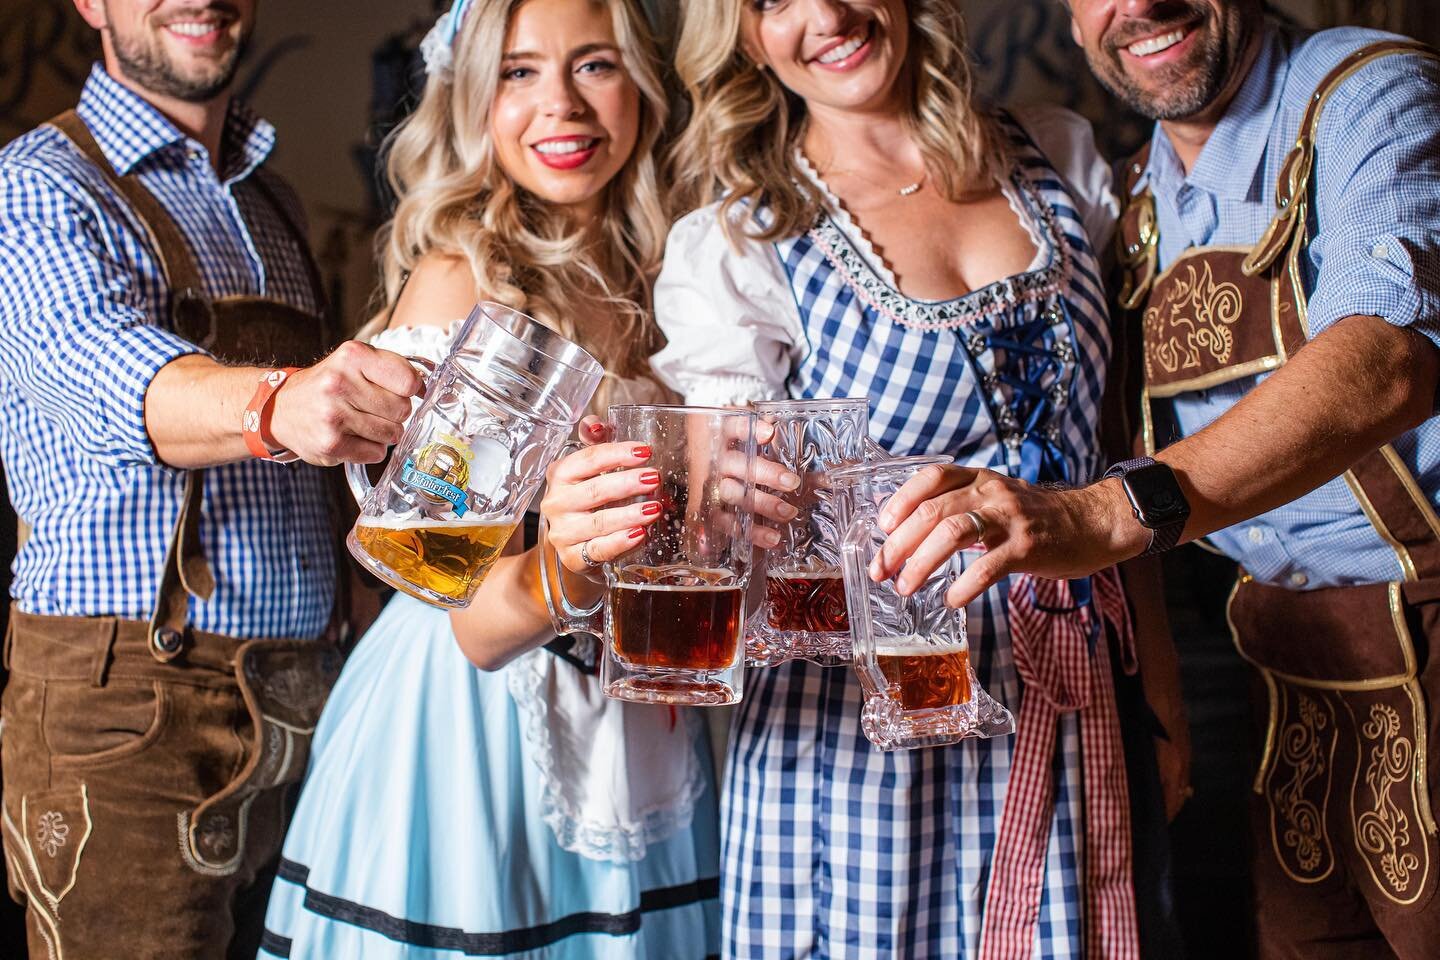 🎉 Keep the Oktoberfest celebration going and treat yourself to a lavish stay at the @OmniFriscoTheStar, the official Frisco Oktoberfest hotel! Enjoy the convenience of being just steps away from all the action. 

The ultimate staycation in Frisco aw